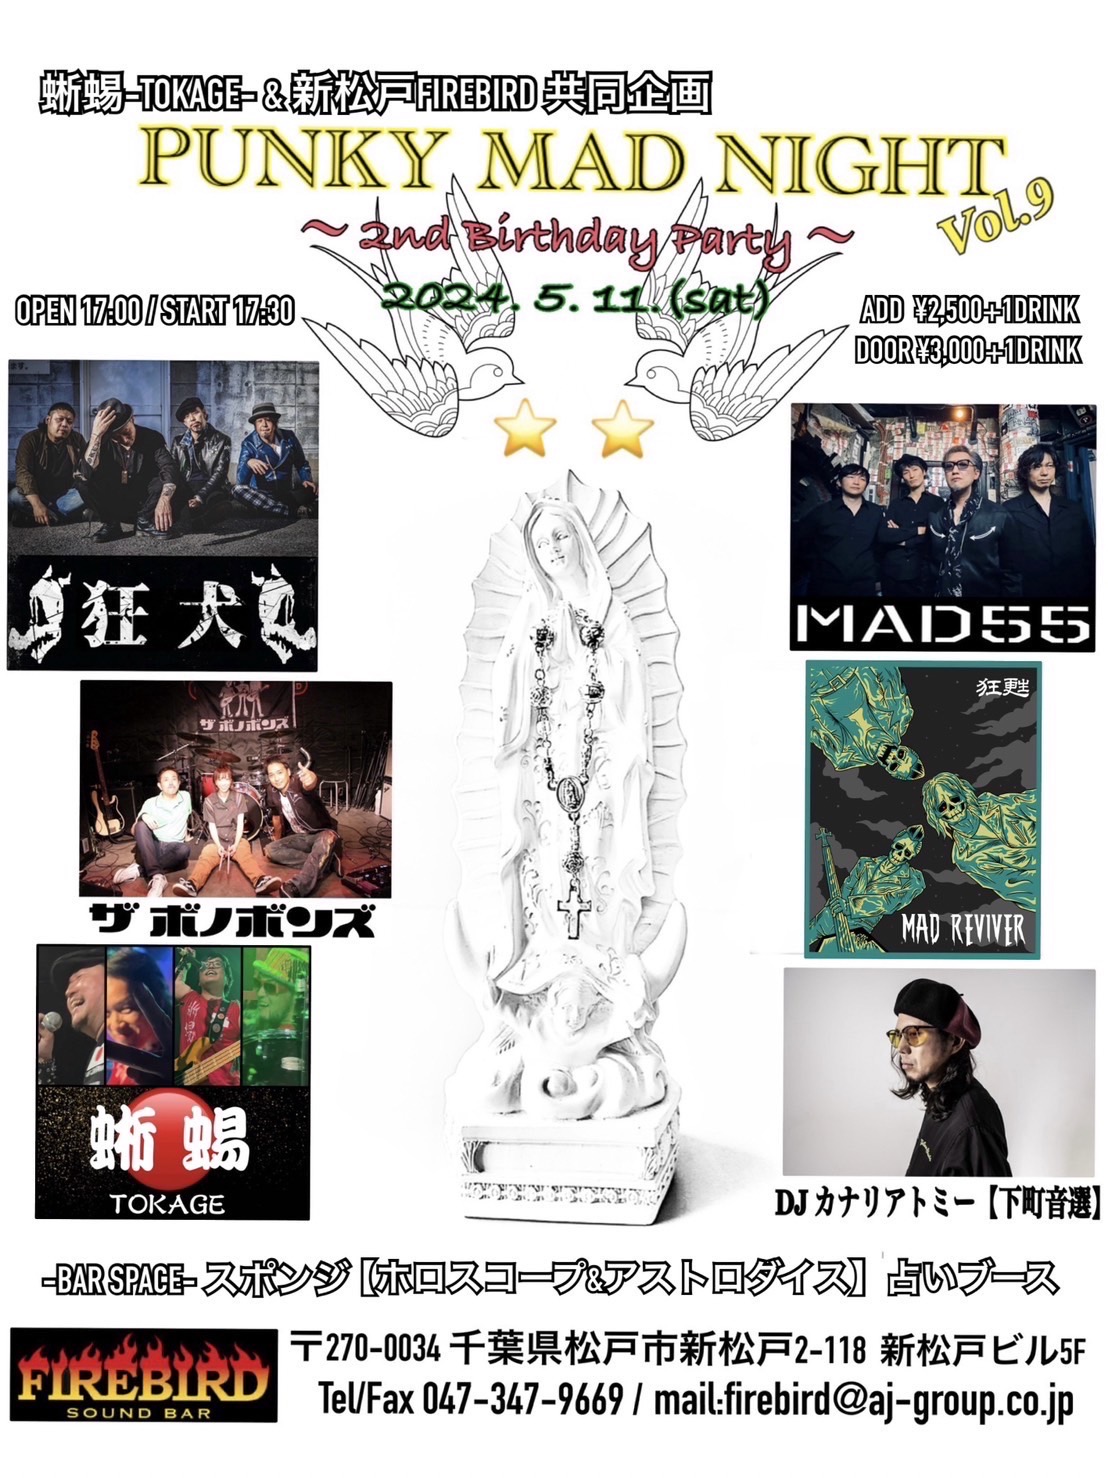 PUNKY MAD NIGHT Vol.9 ～2nd Birthday Party～